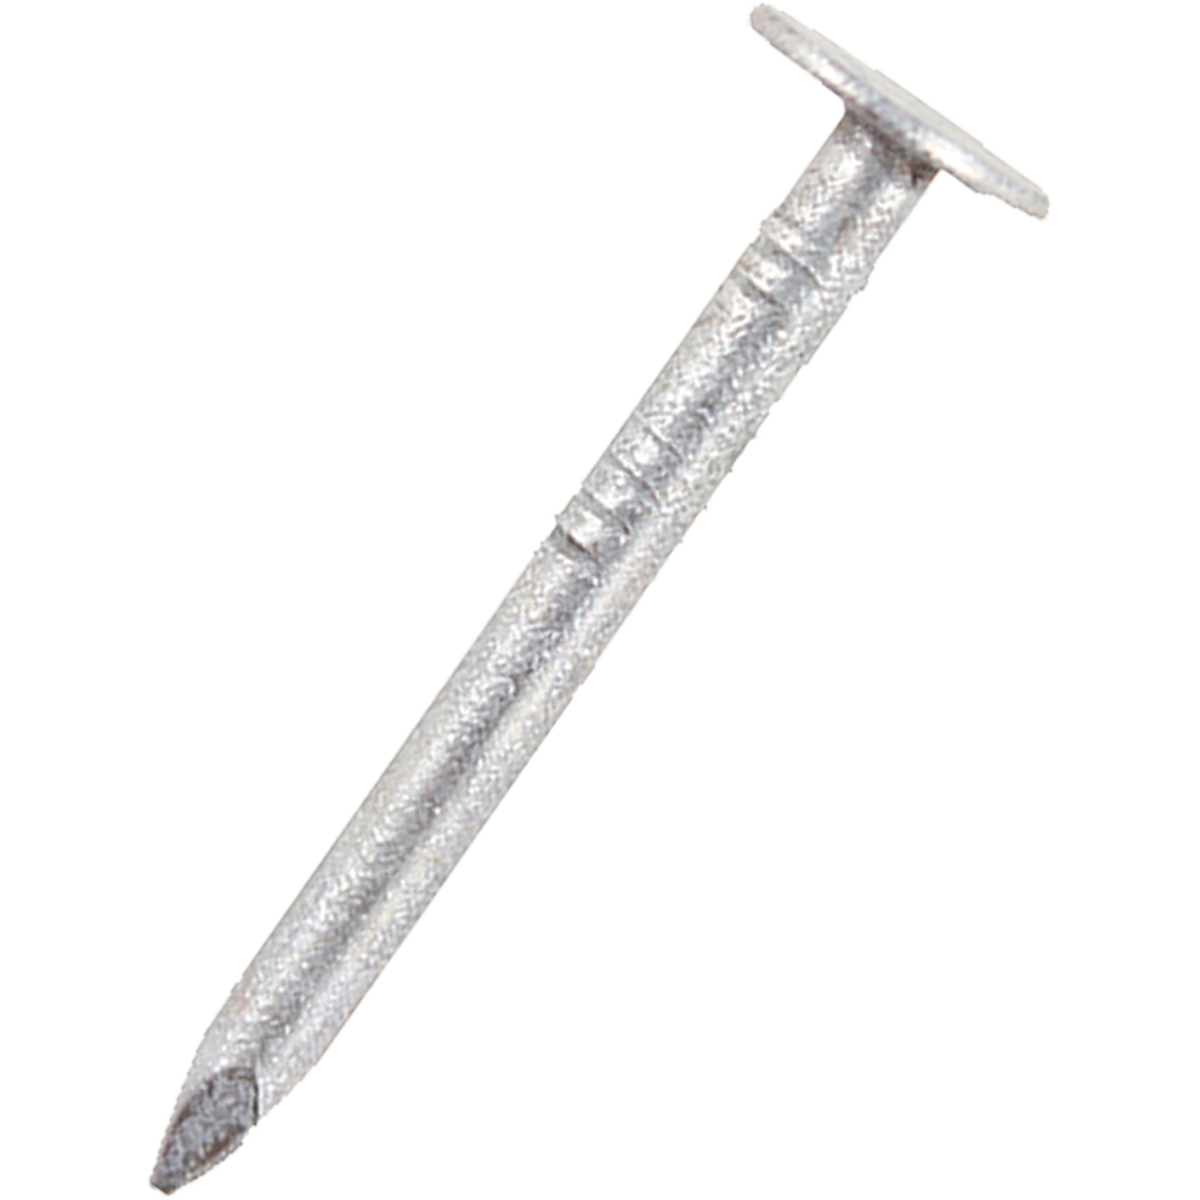 Galvanised clout nail with a large flay head ideal for tacking materials into place.